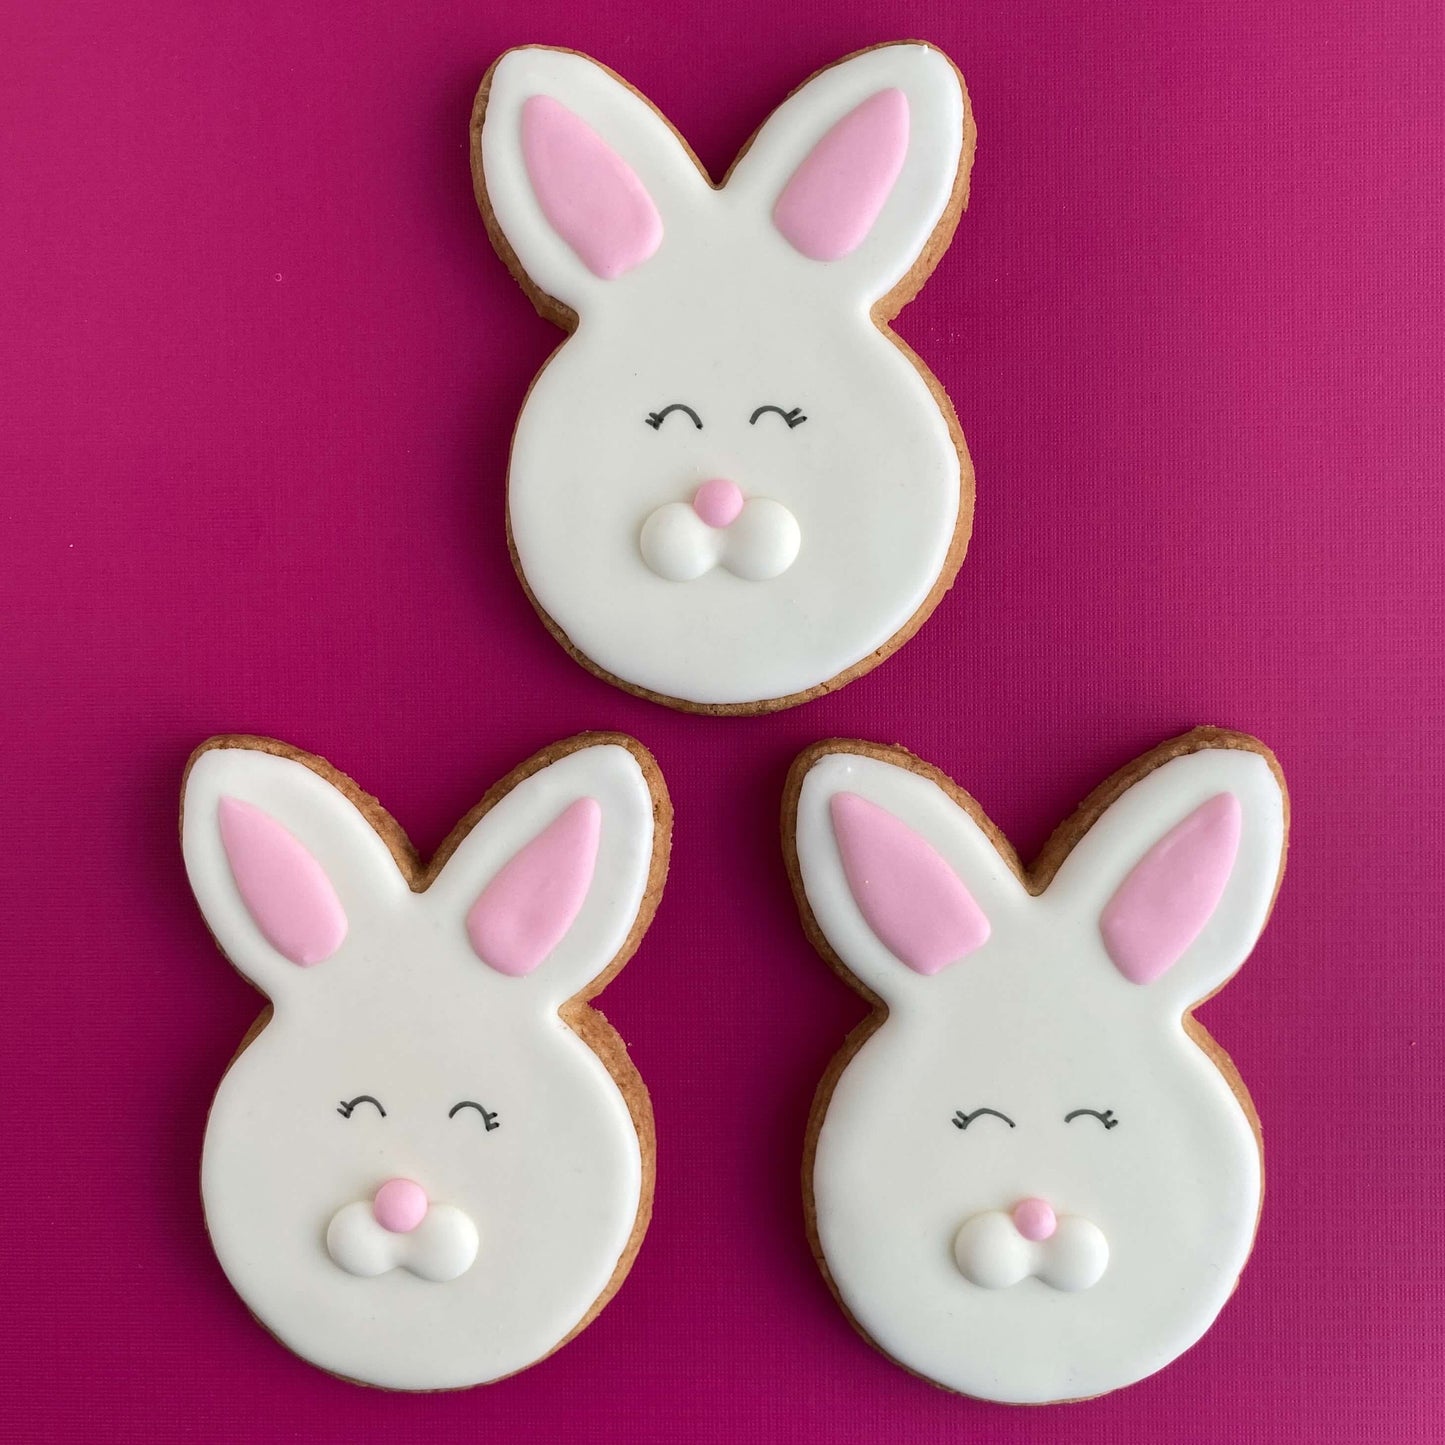 Rabbit Face decorated cookies